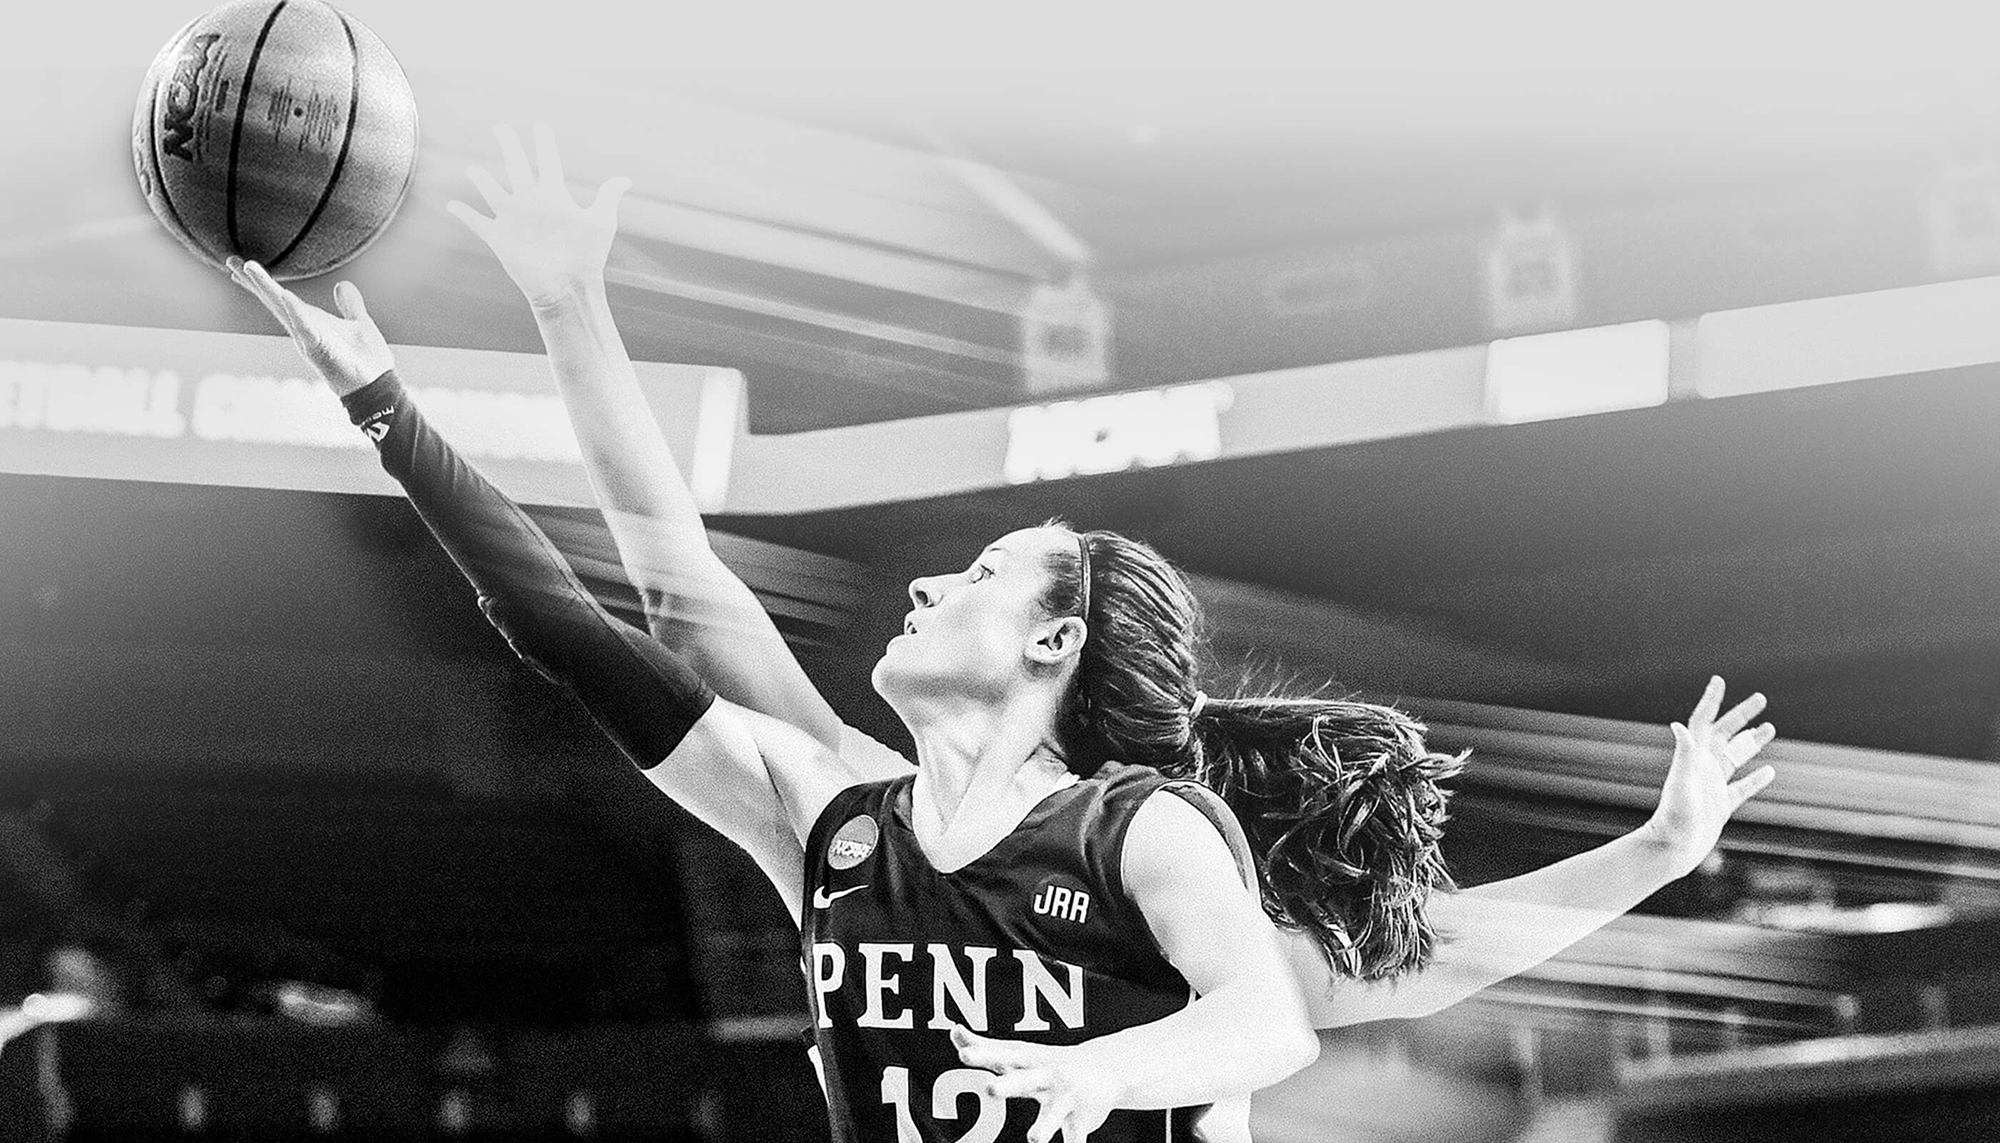 A women's basketball player shoots a shoot in a black and white photo for the Game Onward campaign.